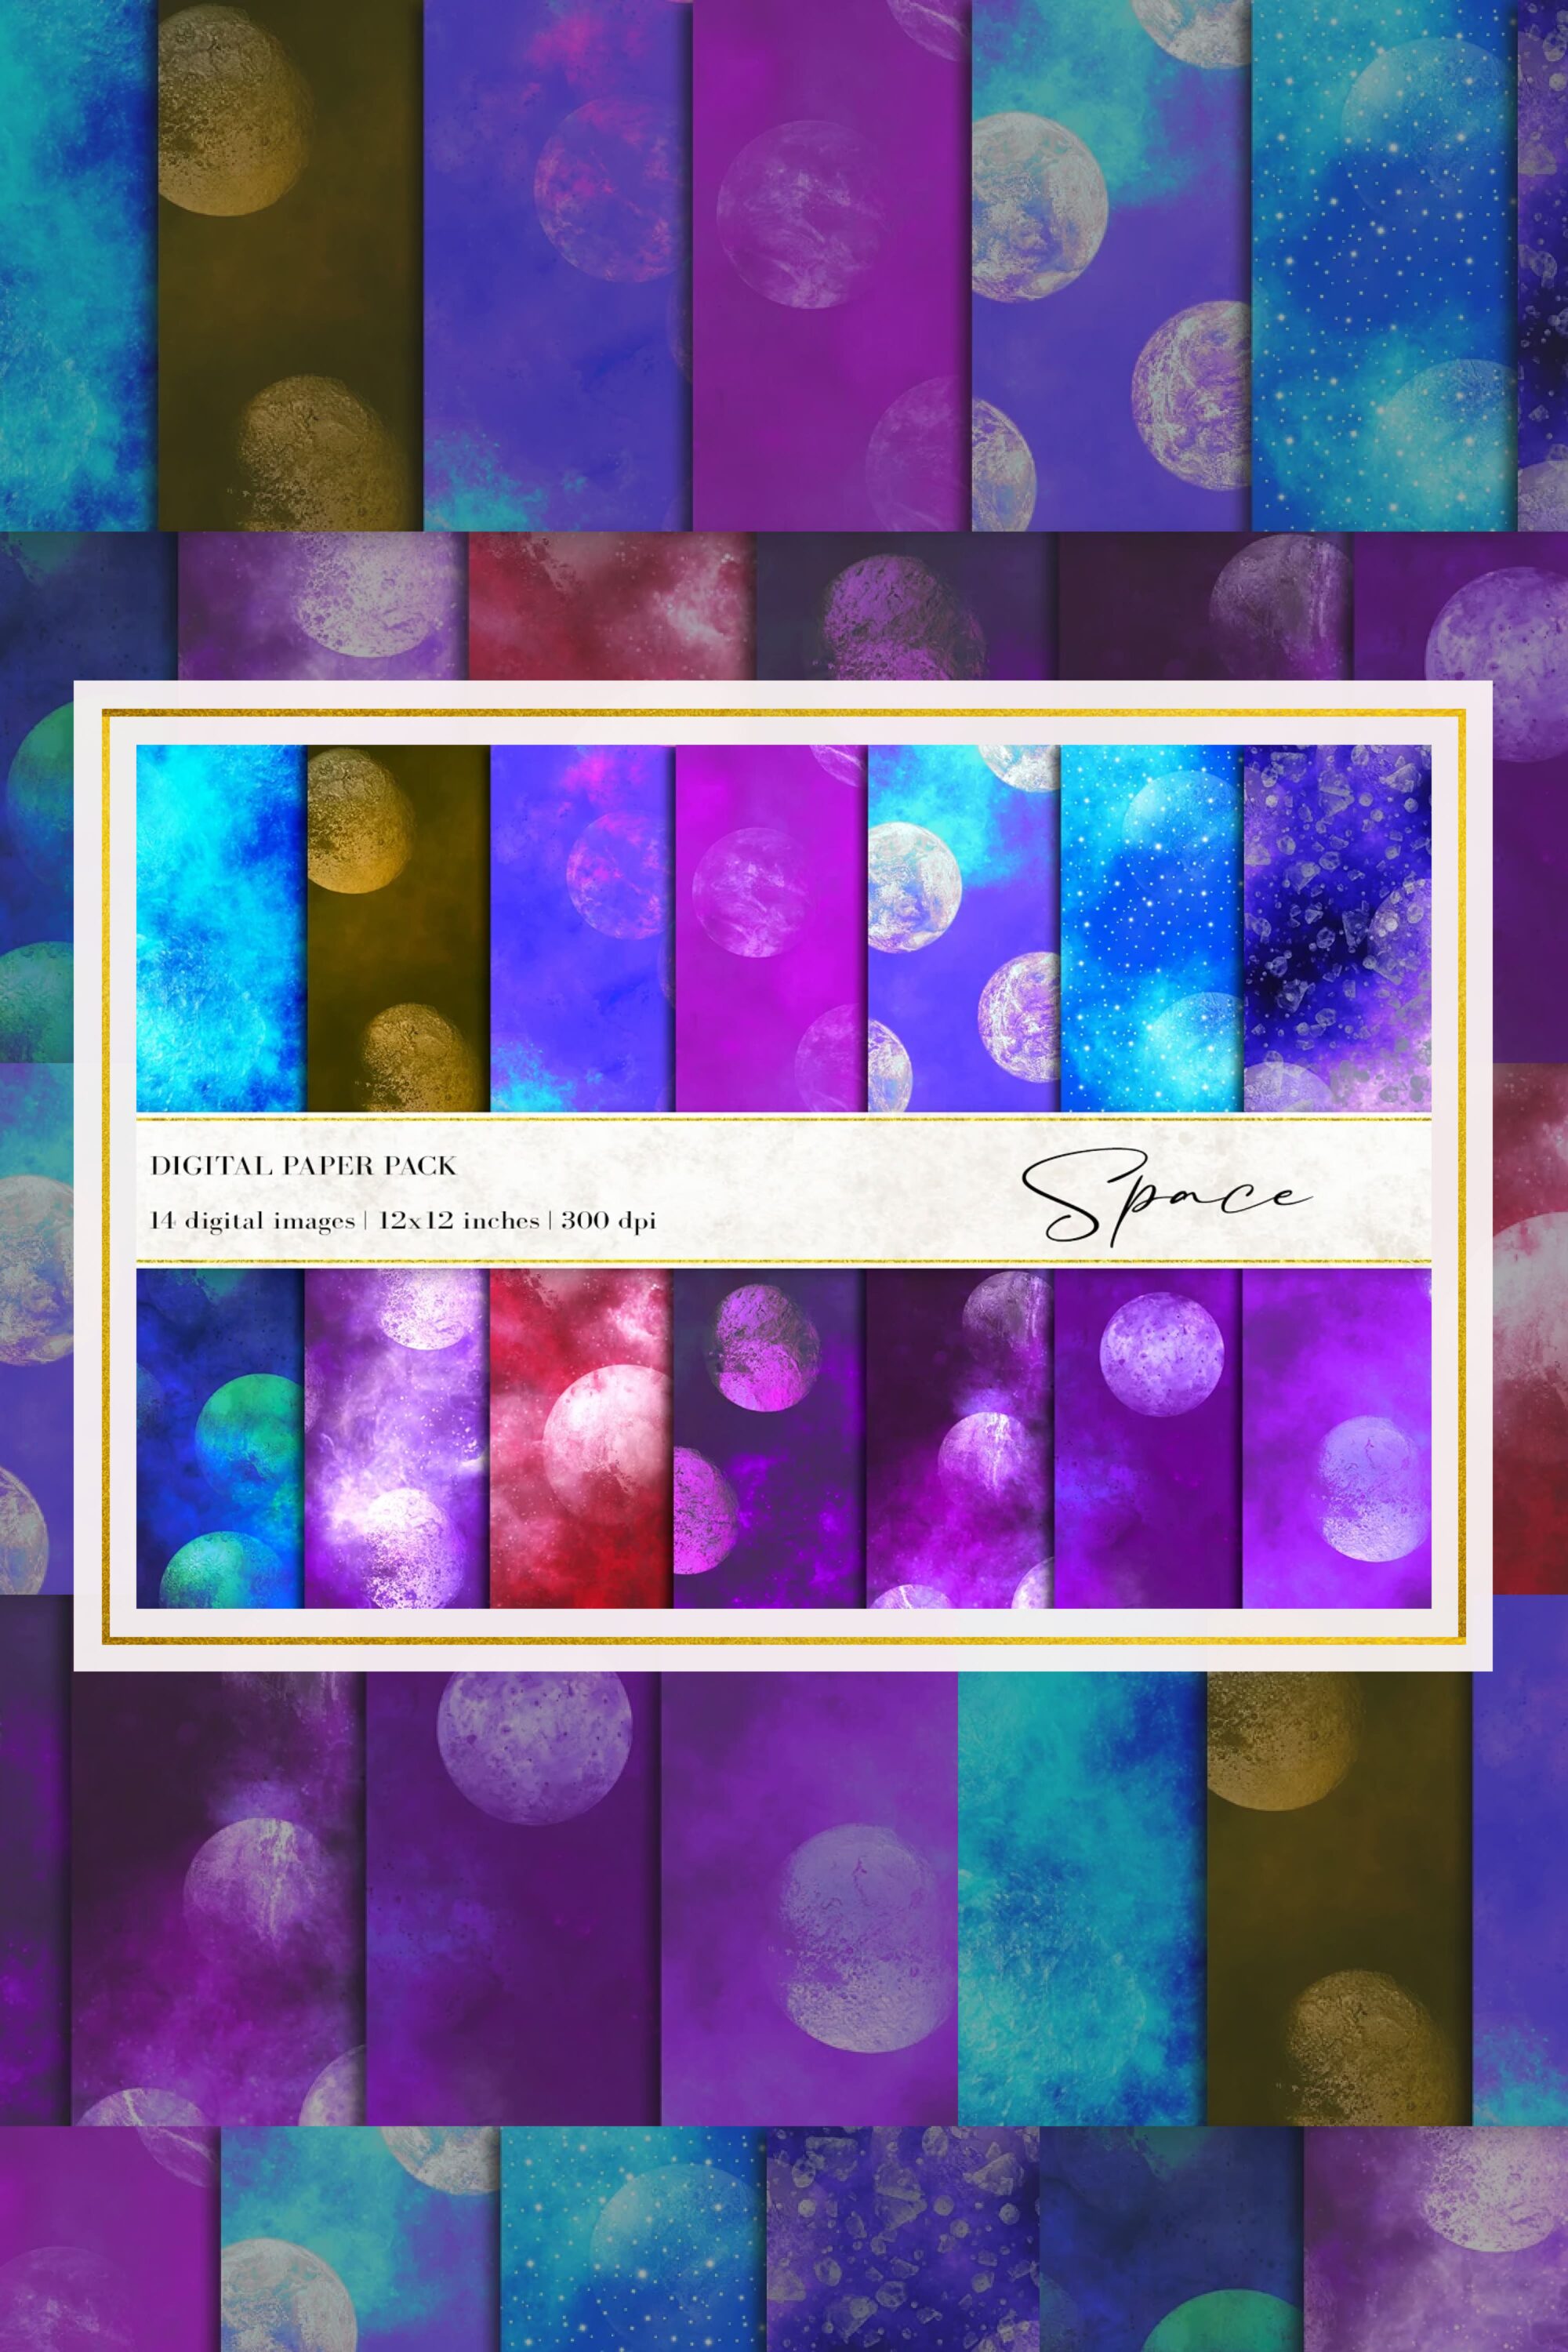 Space Digital Papers pinterest image.